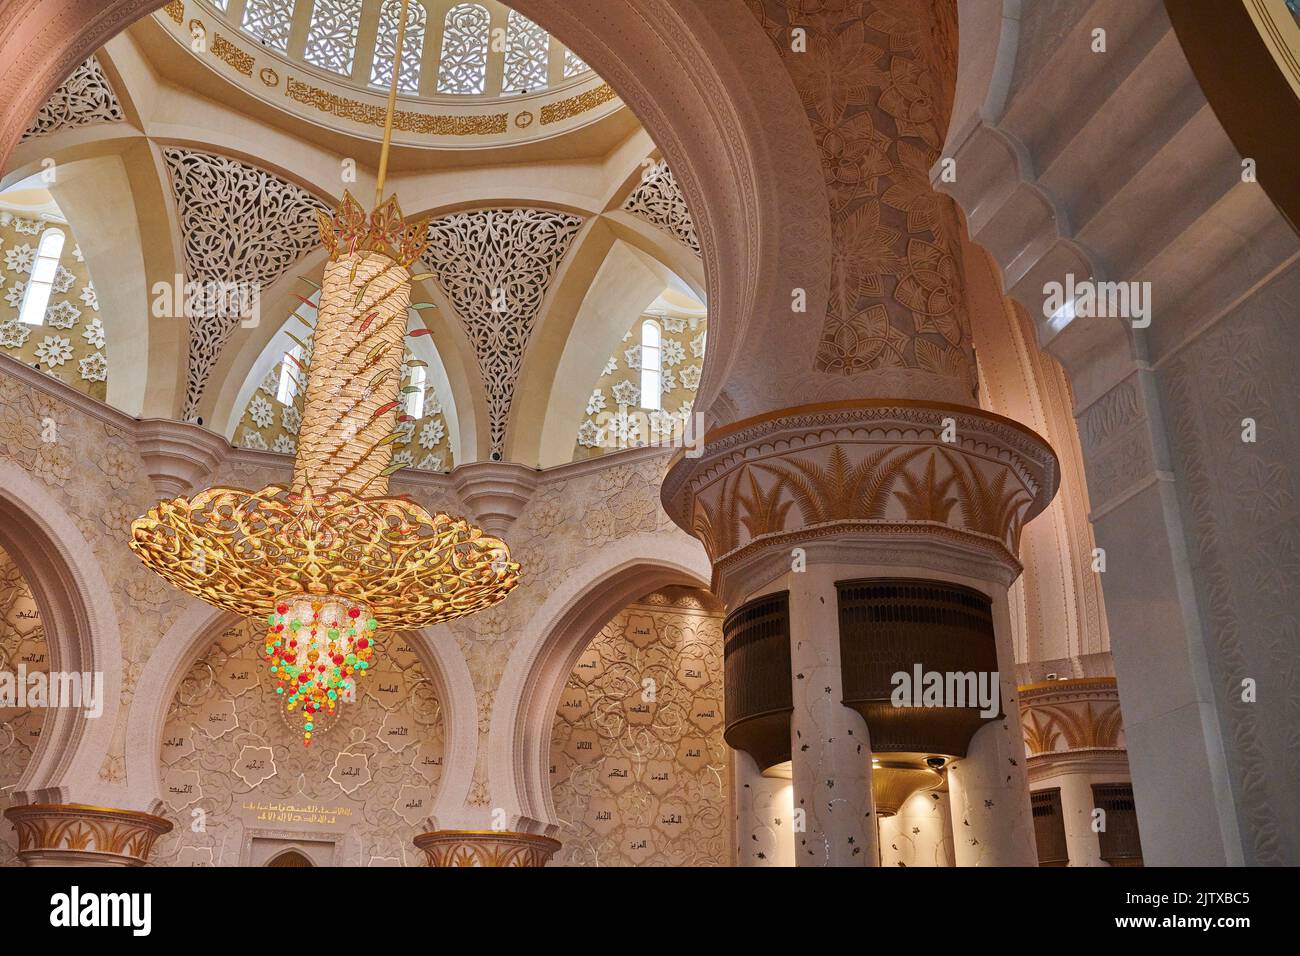 Decorated ceiling with chandelier at Sheikh Zayed Mosque. Abu Dhabi. United Arab Emirates. Stock Photo